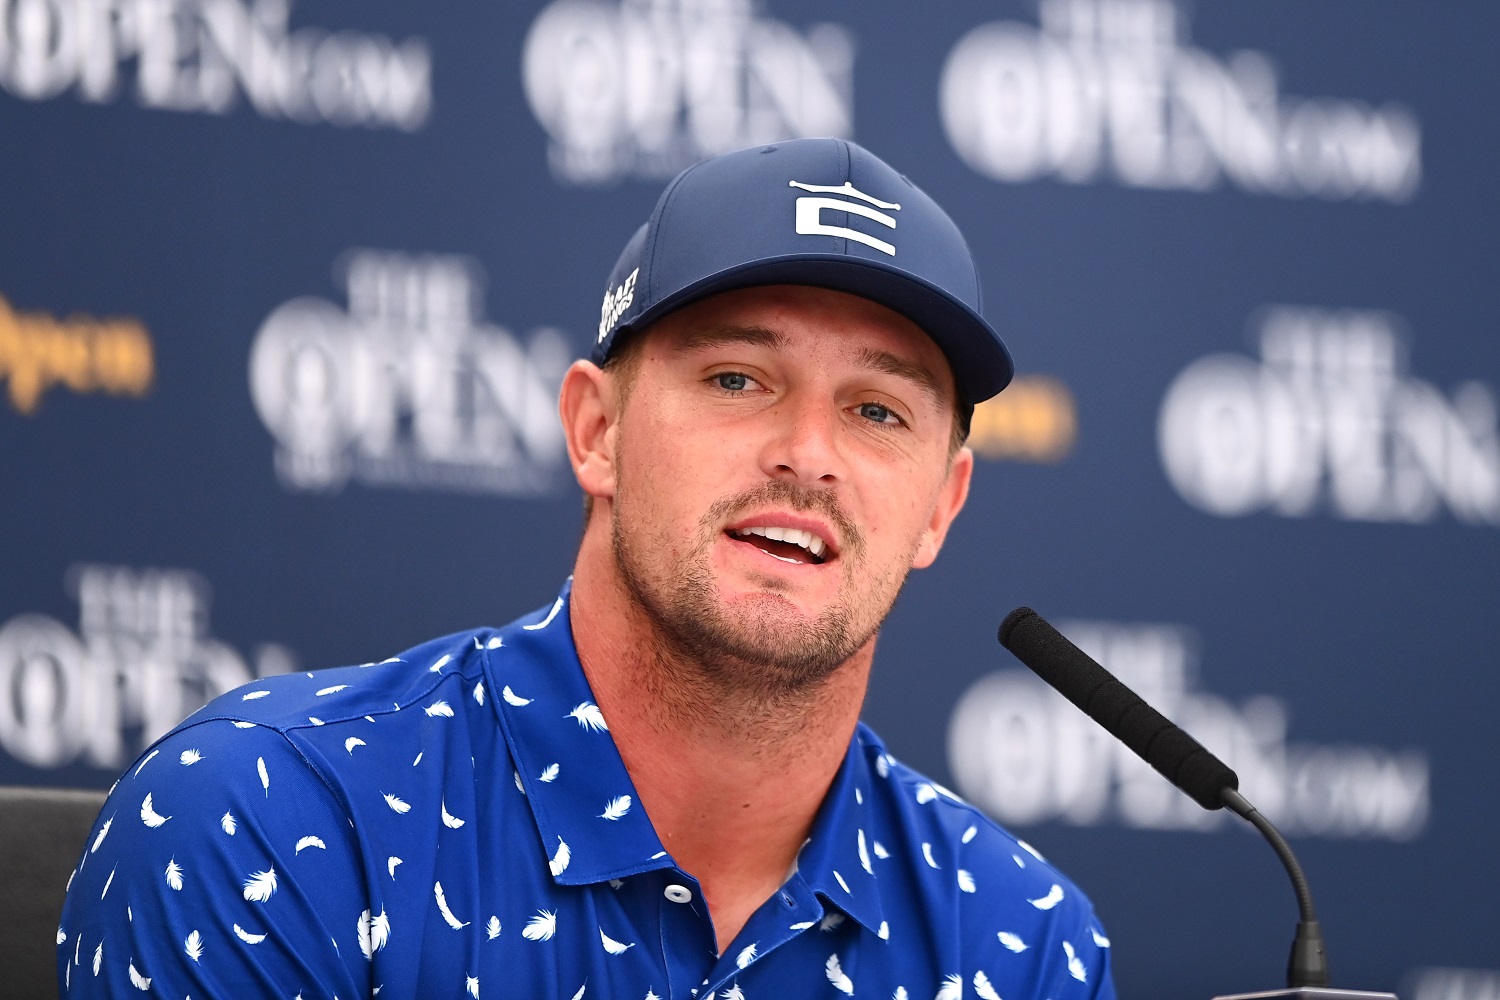 Bryson DeChambeau speaks during a press conference for The 149th Open on July 13, 2021, in Sandwich, England.